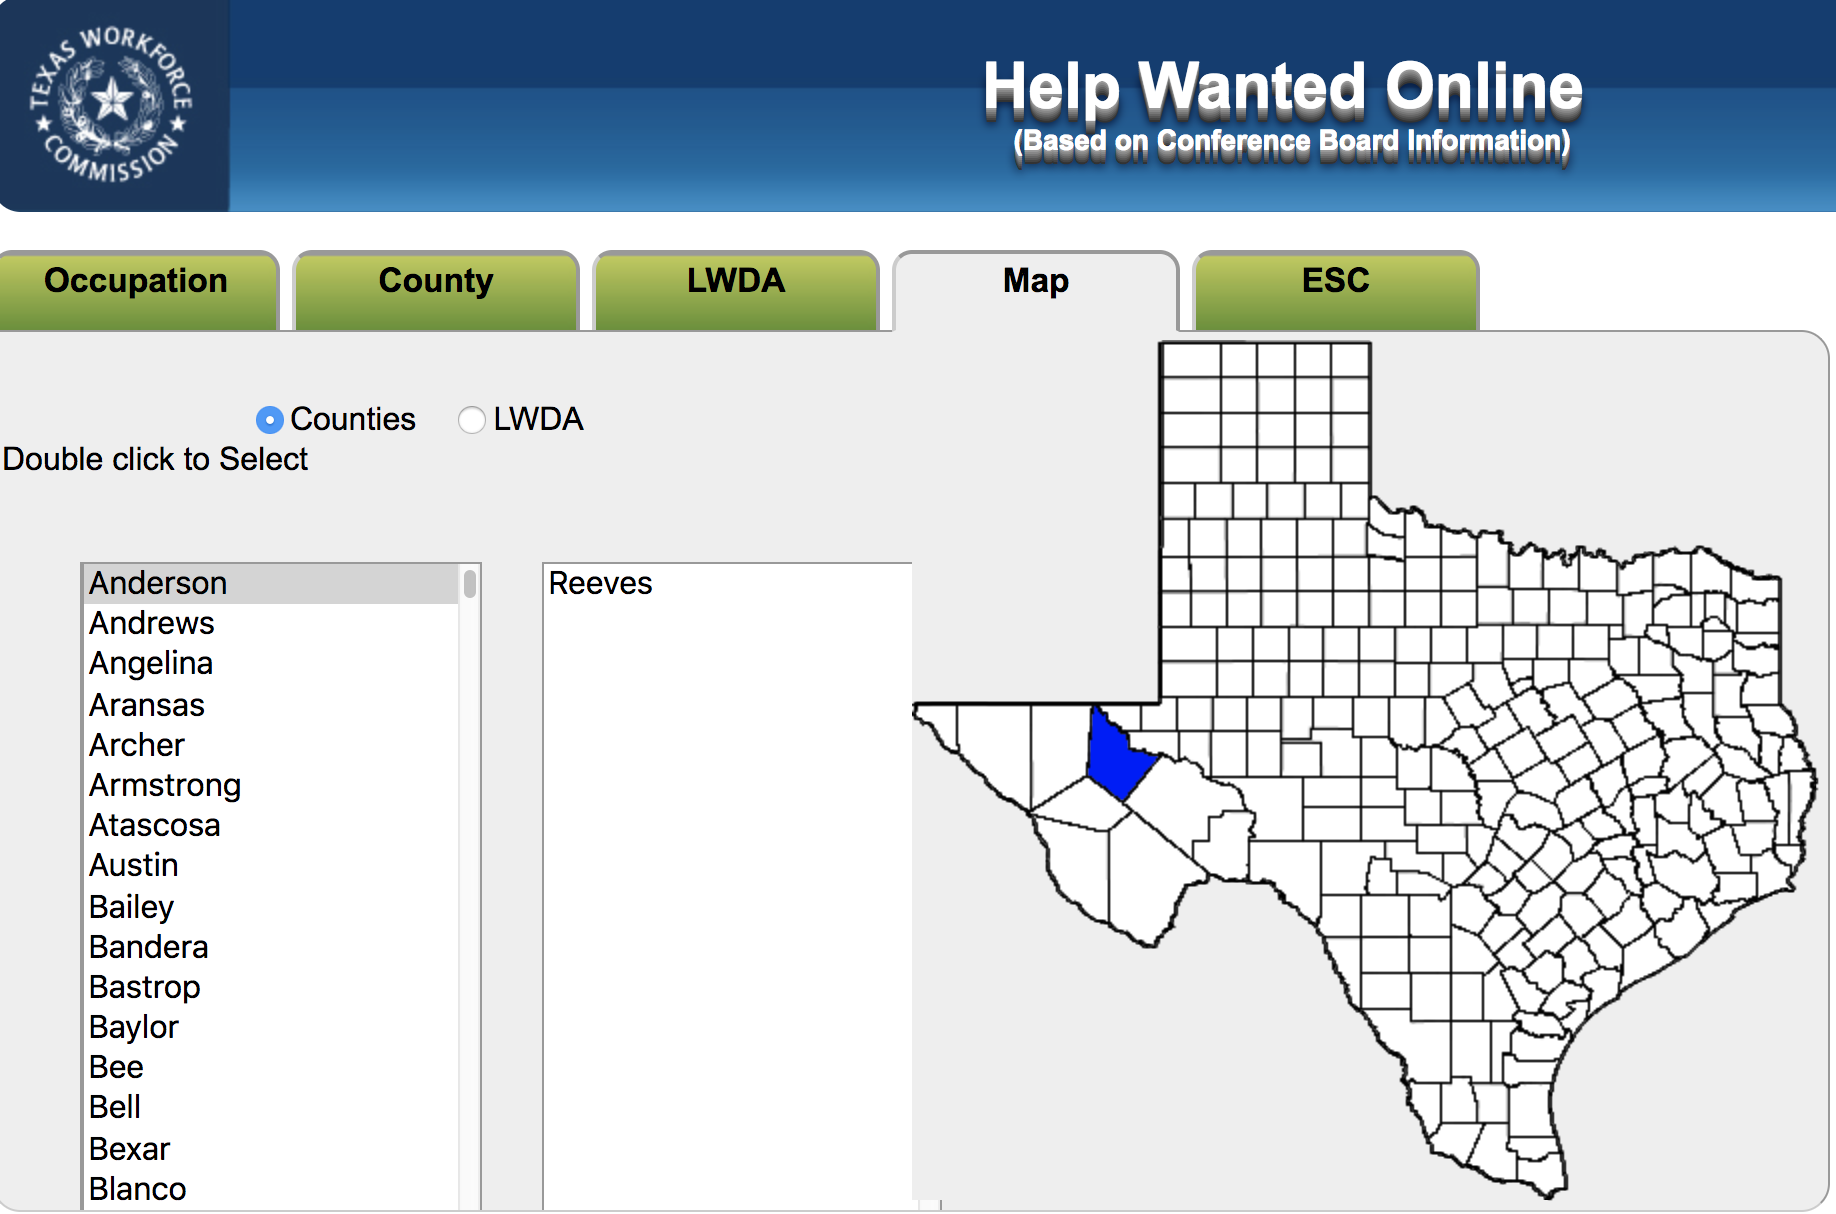 Screenshot: Map of Texas with region highlighted, titled Help Wanted Online